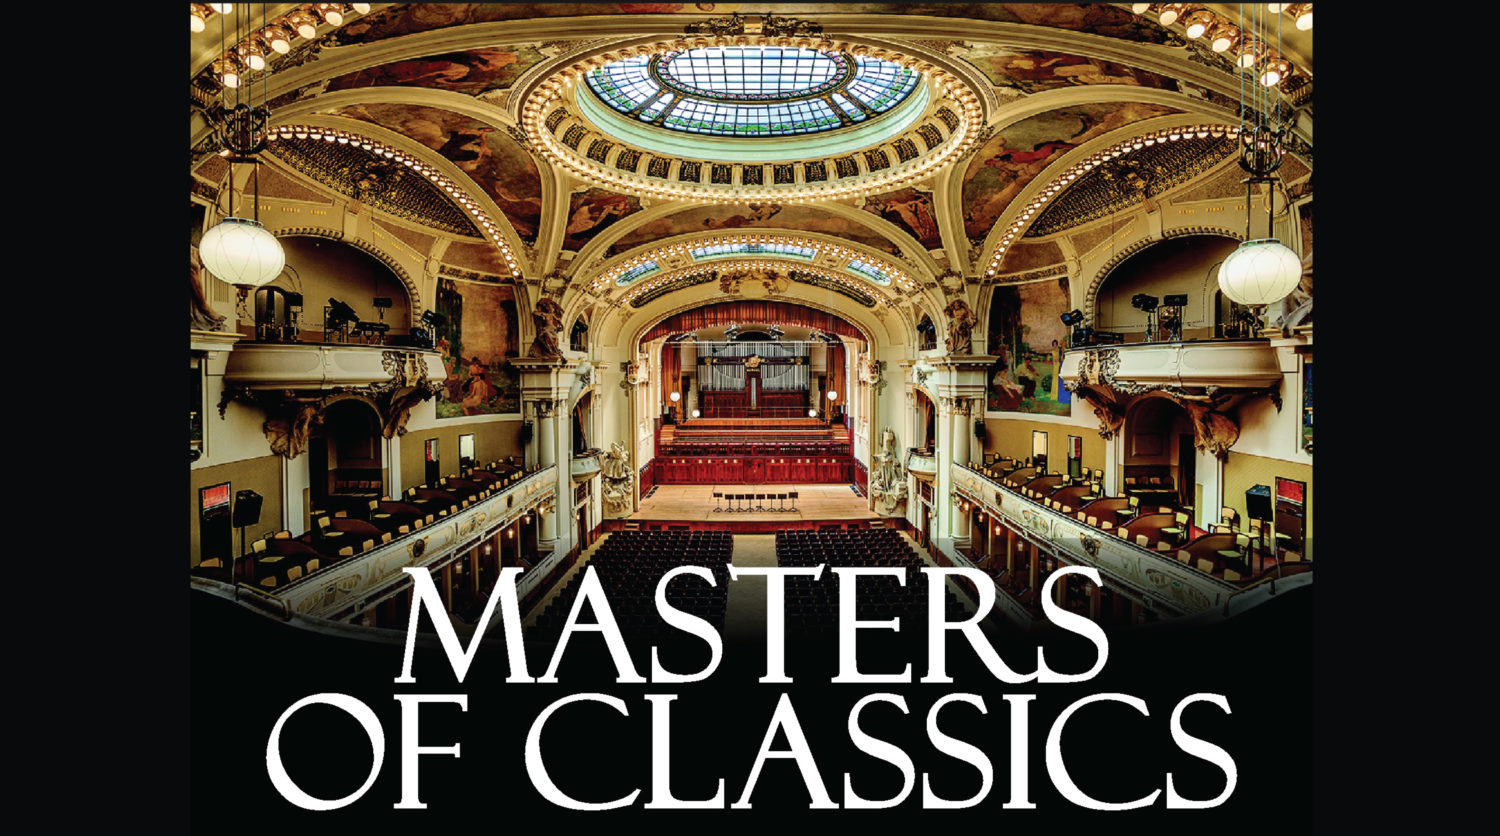 MASTERS OF CLASSICS IN THE MUNICIPAL HOUSE 13.06.2019